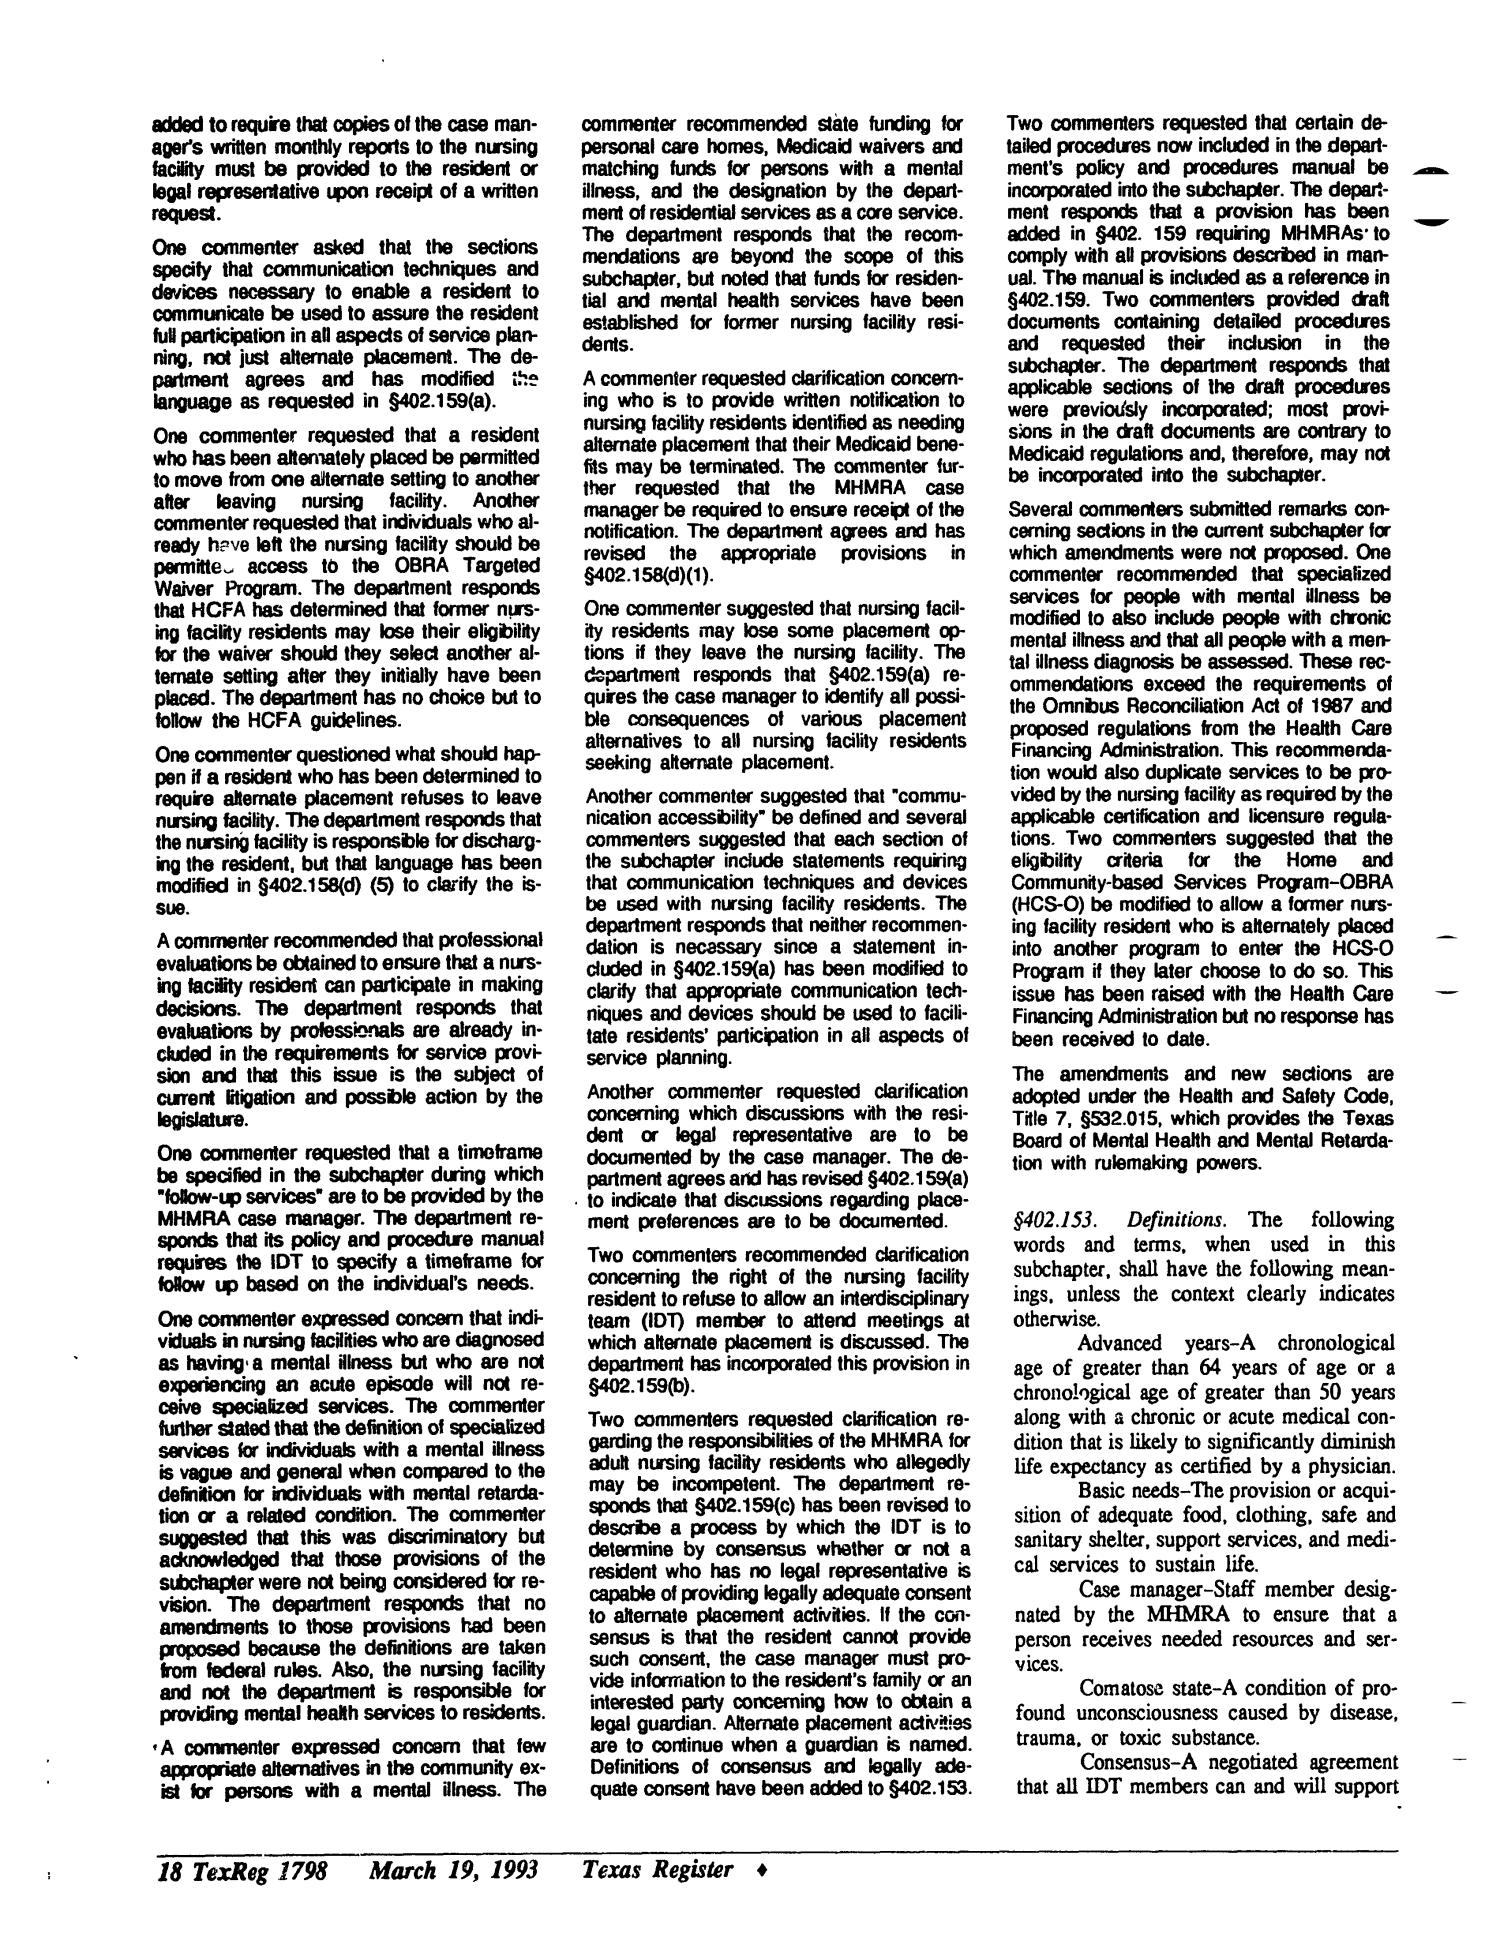 Texas Register, Volume 18, Number 22, Pages 1783-1825, March 19, 1993
                                                
                                                    1798
                                                